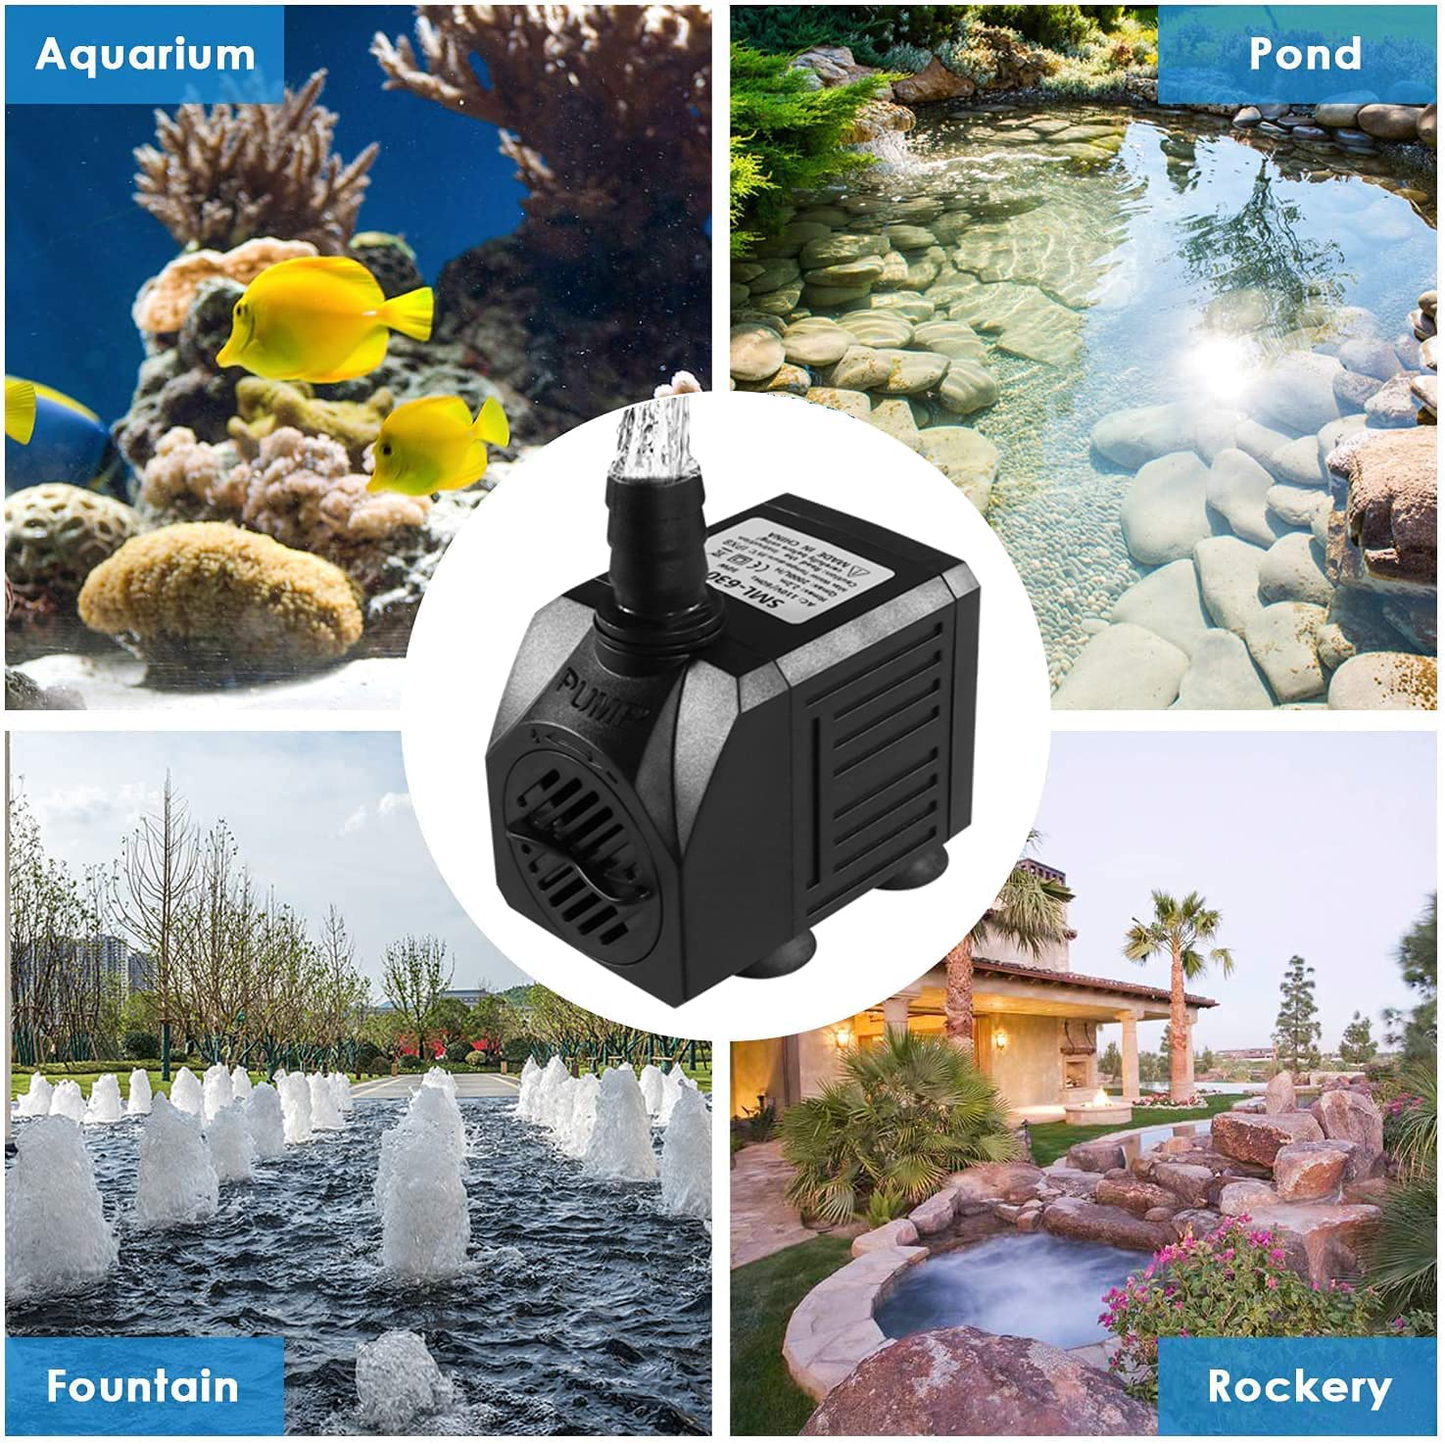 Asfrost Fountain Pump, 520GPH(30W 2000L/H) Submersible Water Pump, Outdoor Pond Pump with 6.5Ft Tubing (1/2" ID), 7.2Ft High Lift, 3 Nozzles for Aquarium, Small Waterfall, Fish Tank, Hydroponics Animals & Pet Supplies > Pet Supplies > Fish Supplies > Aquarium & Pond Tubing AsFrost   